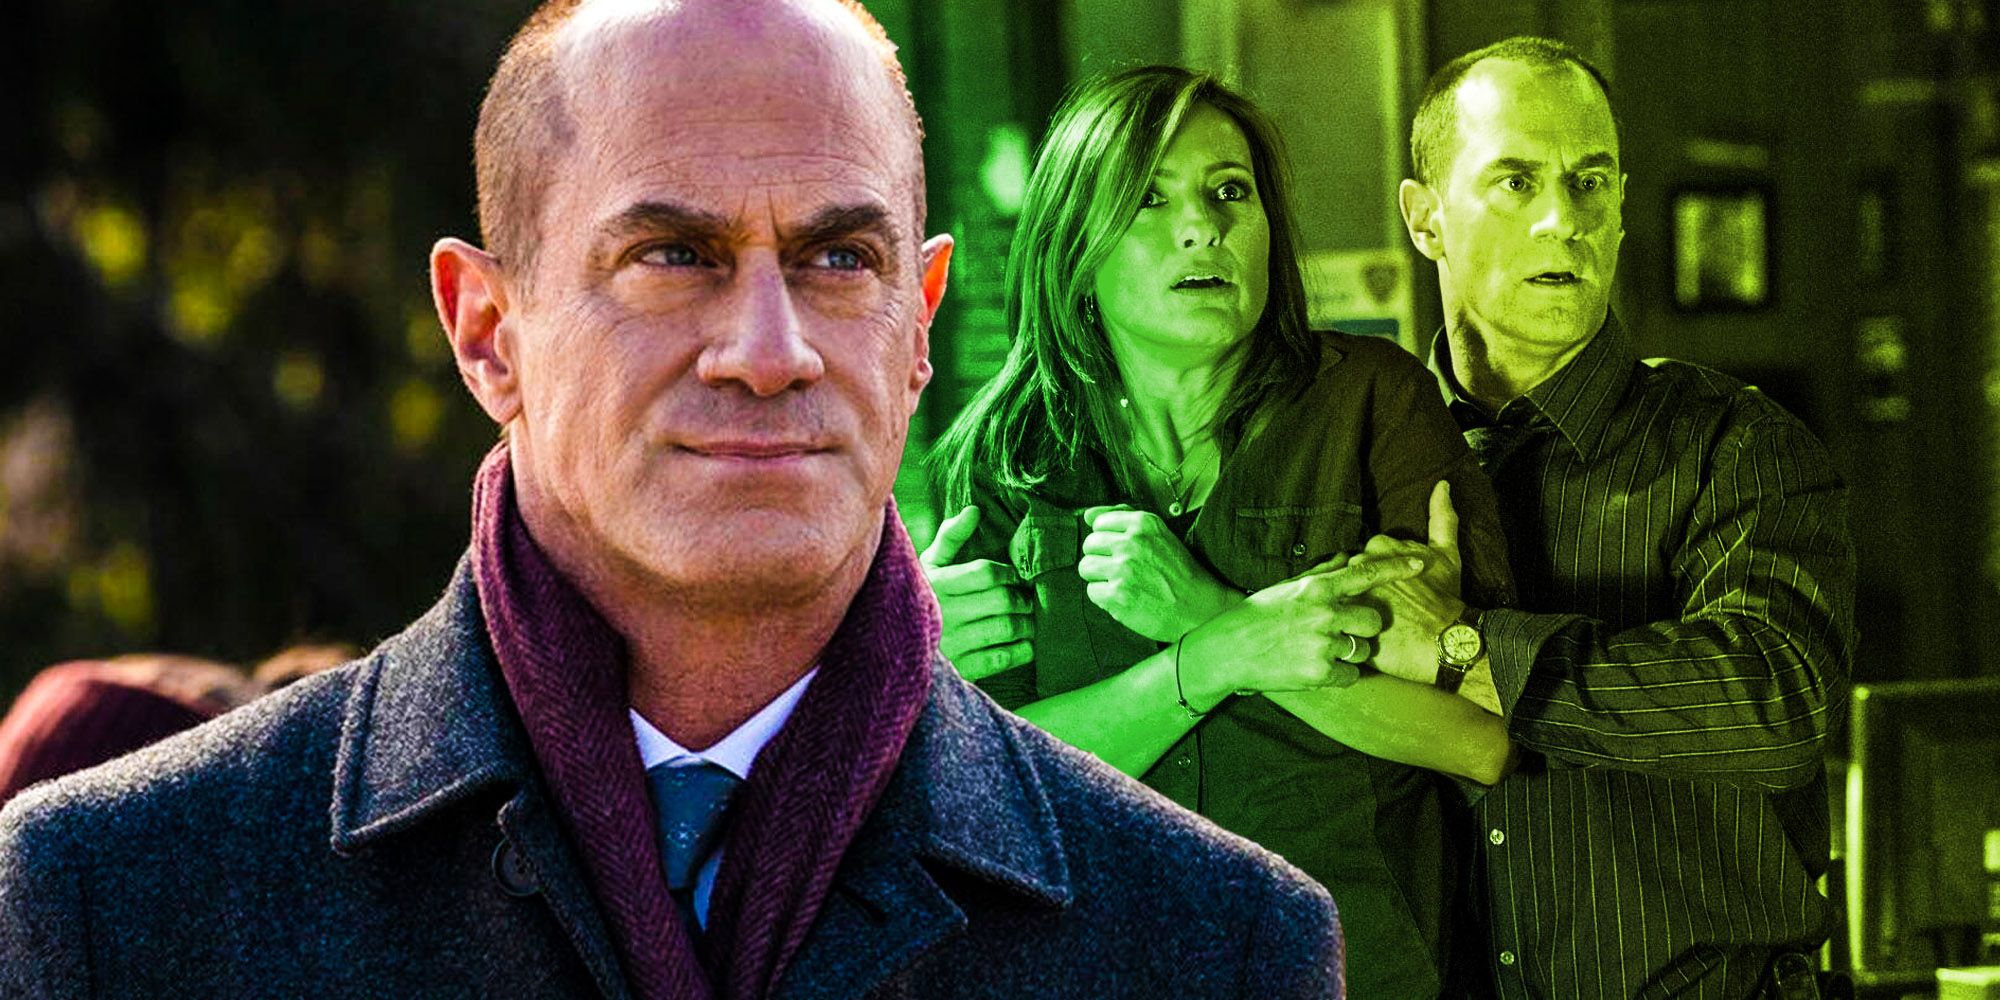 Stabler’s SVU Tragedy Makes A Benson Romance More Likely